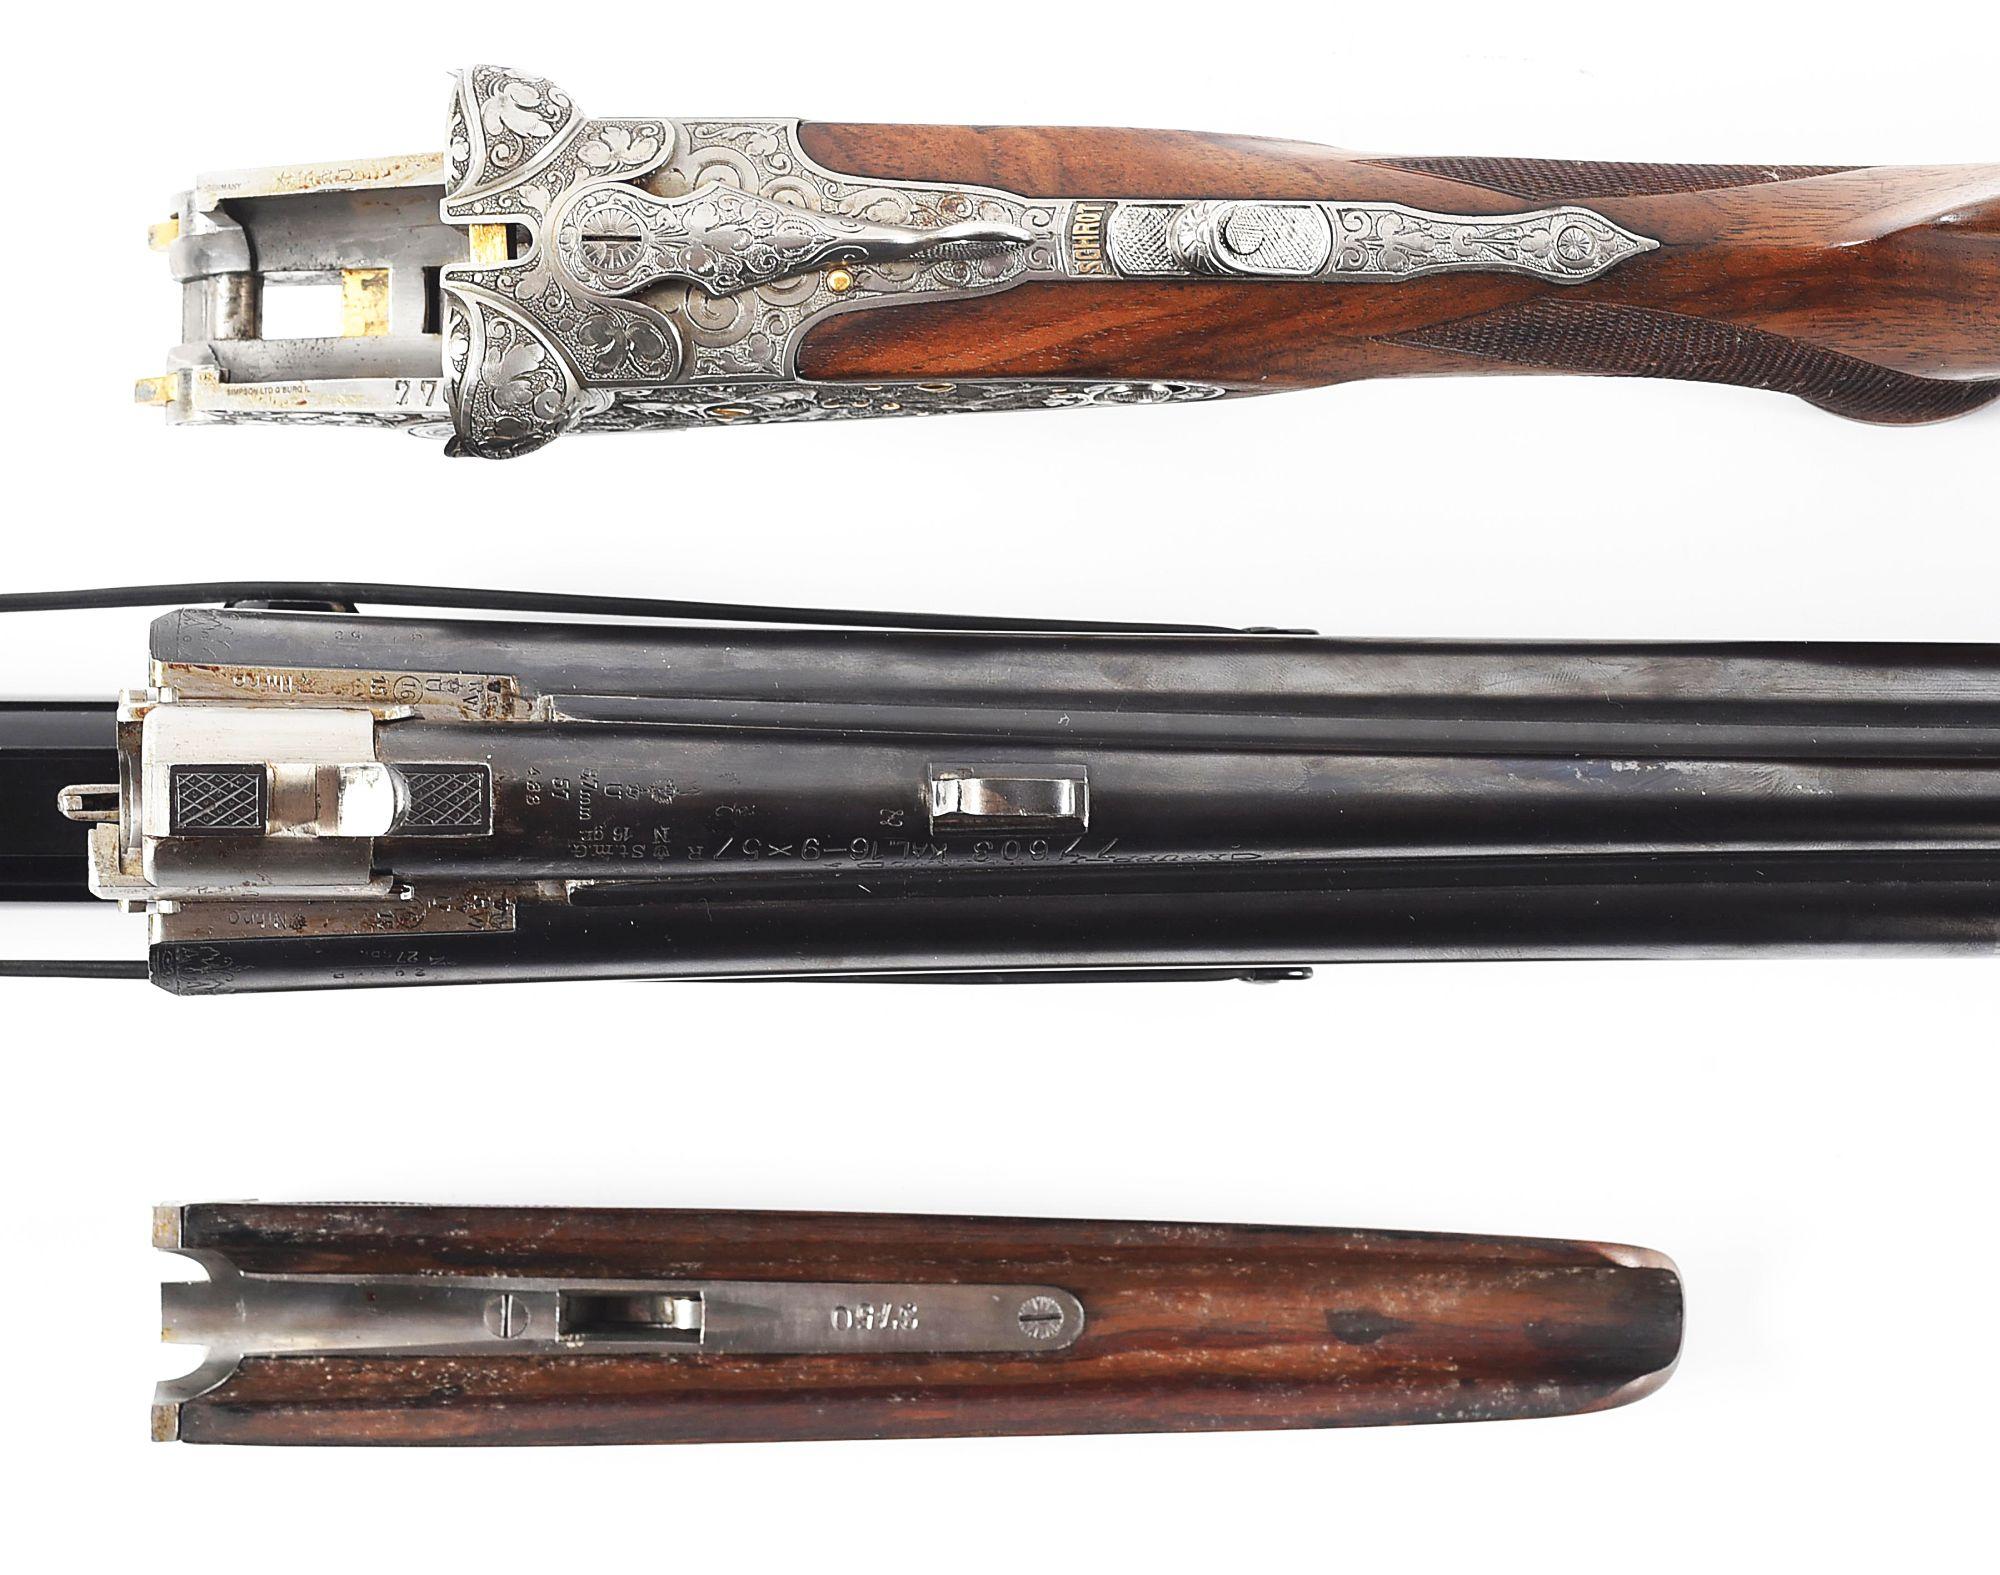 (C) FRANZ KETTNER 16 GAUGE AND 9.3X62 DRILLING WITH ZEISS 8X52 SCOPE.